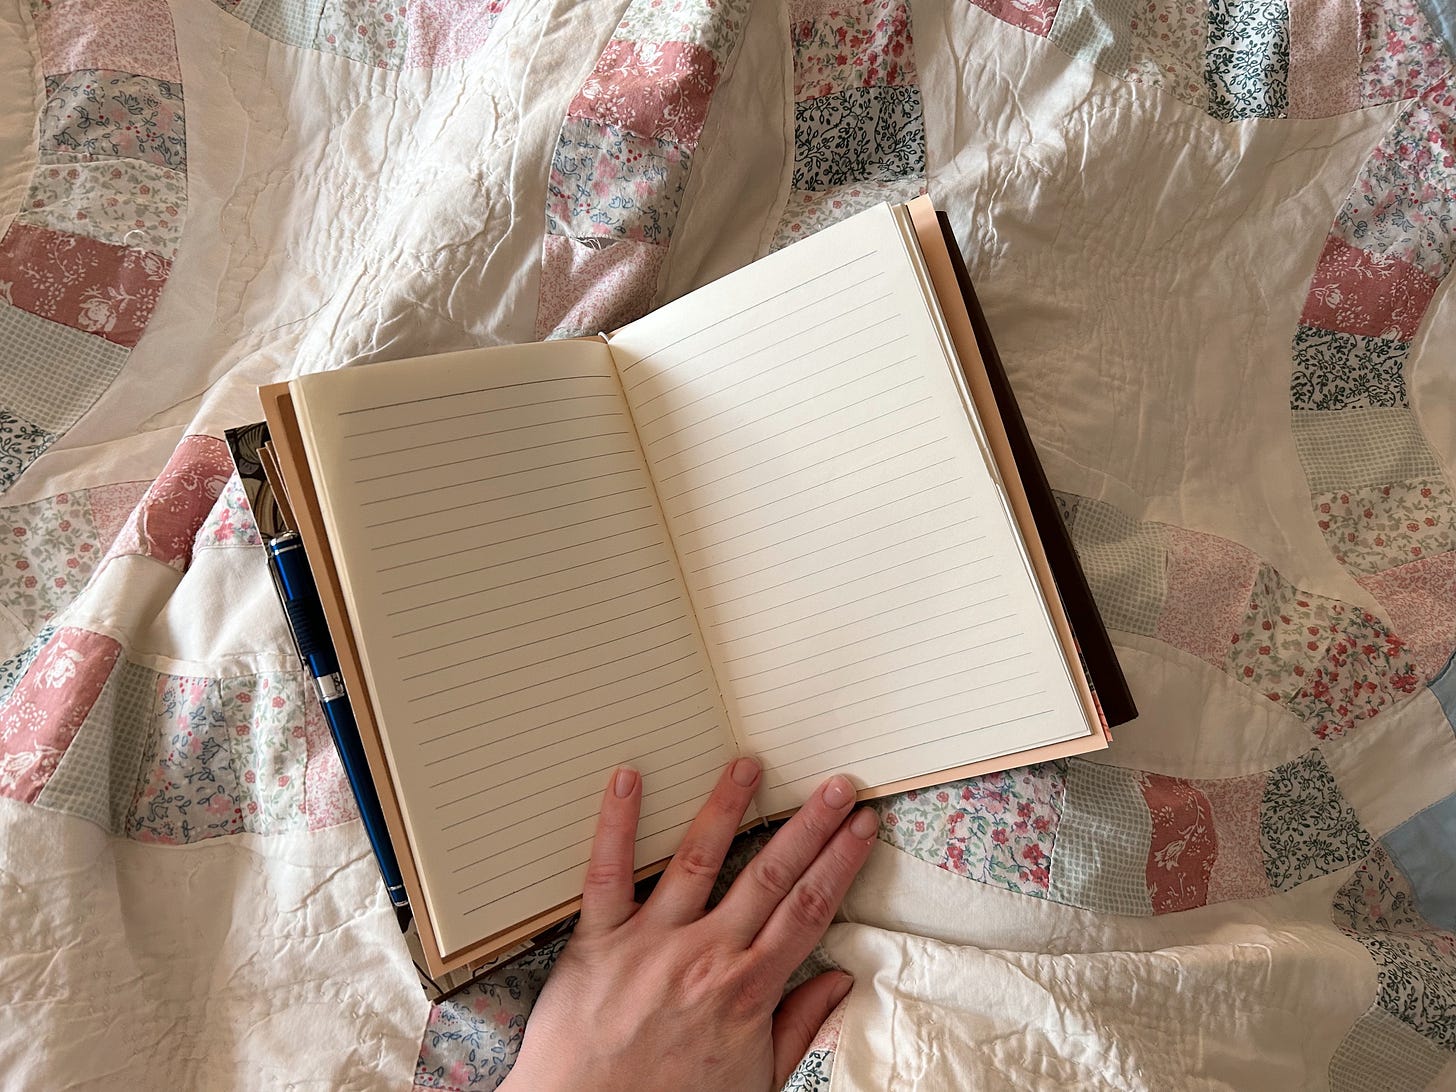 A pale hand holds open a lined traveler's notebook on a handmade quilt of pink and blue interlocking rings